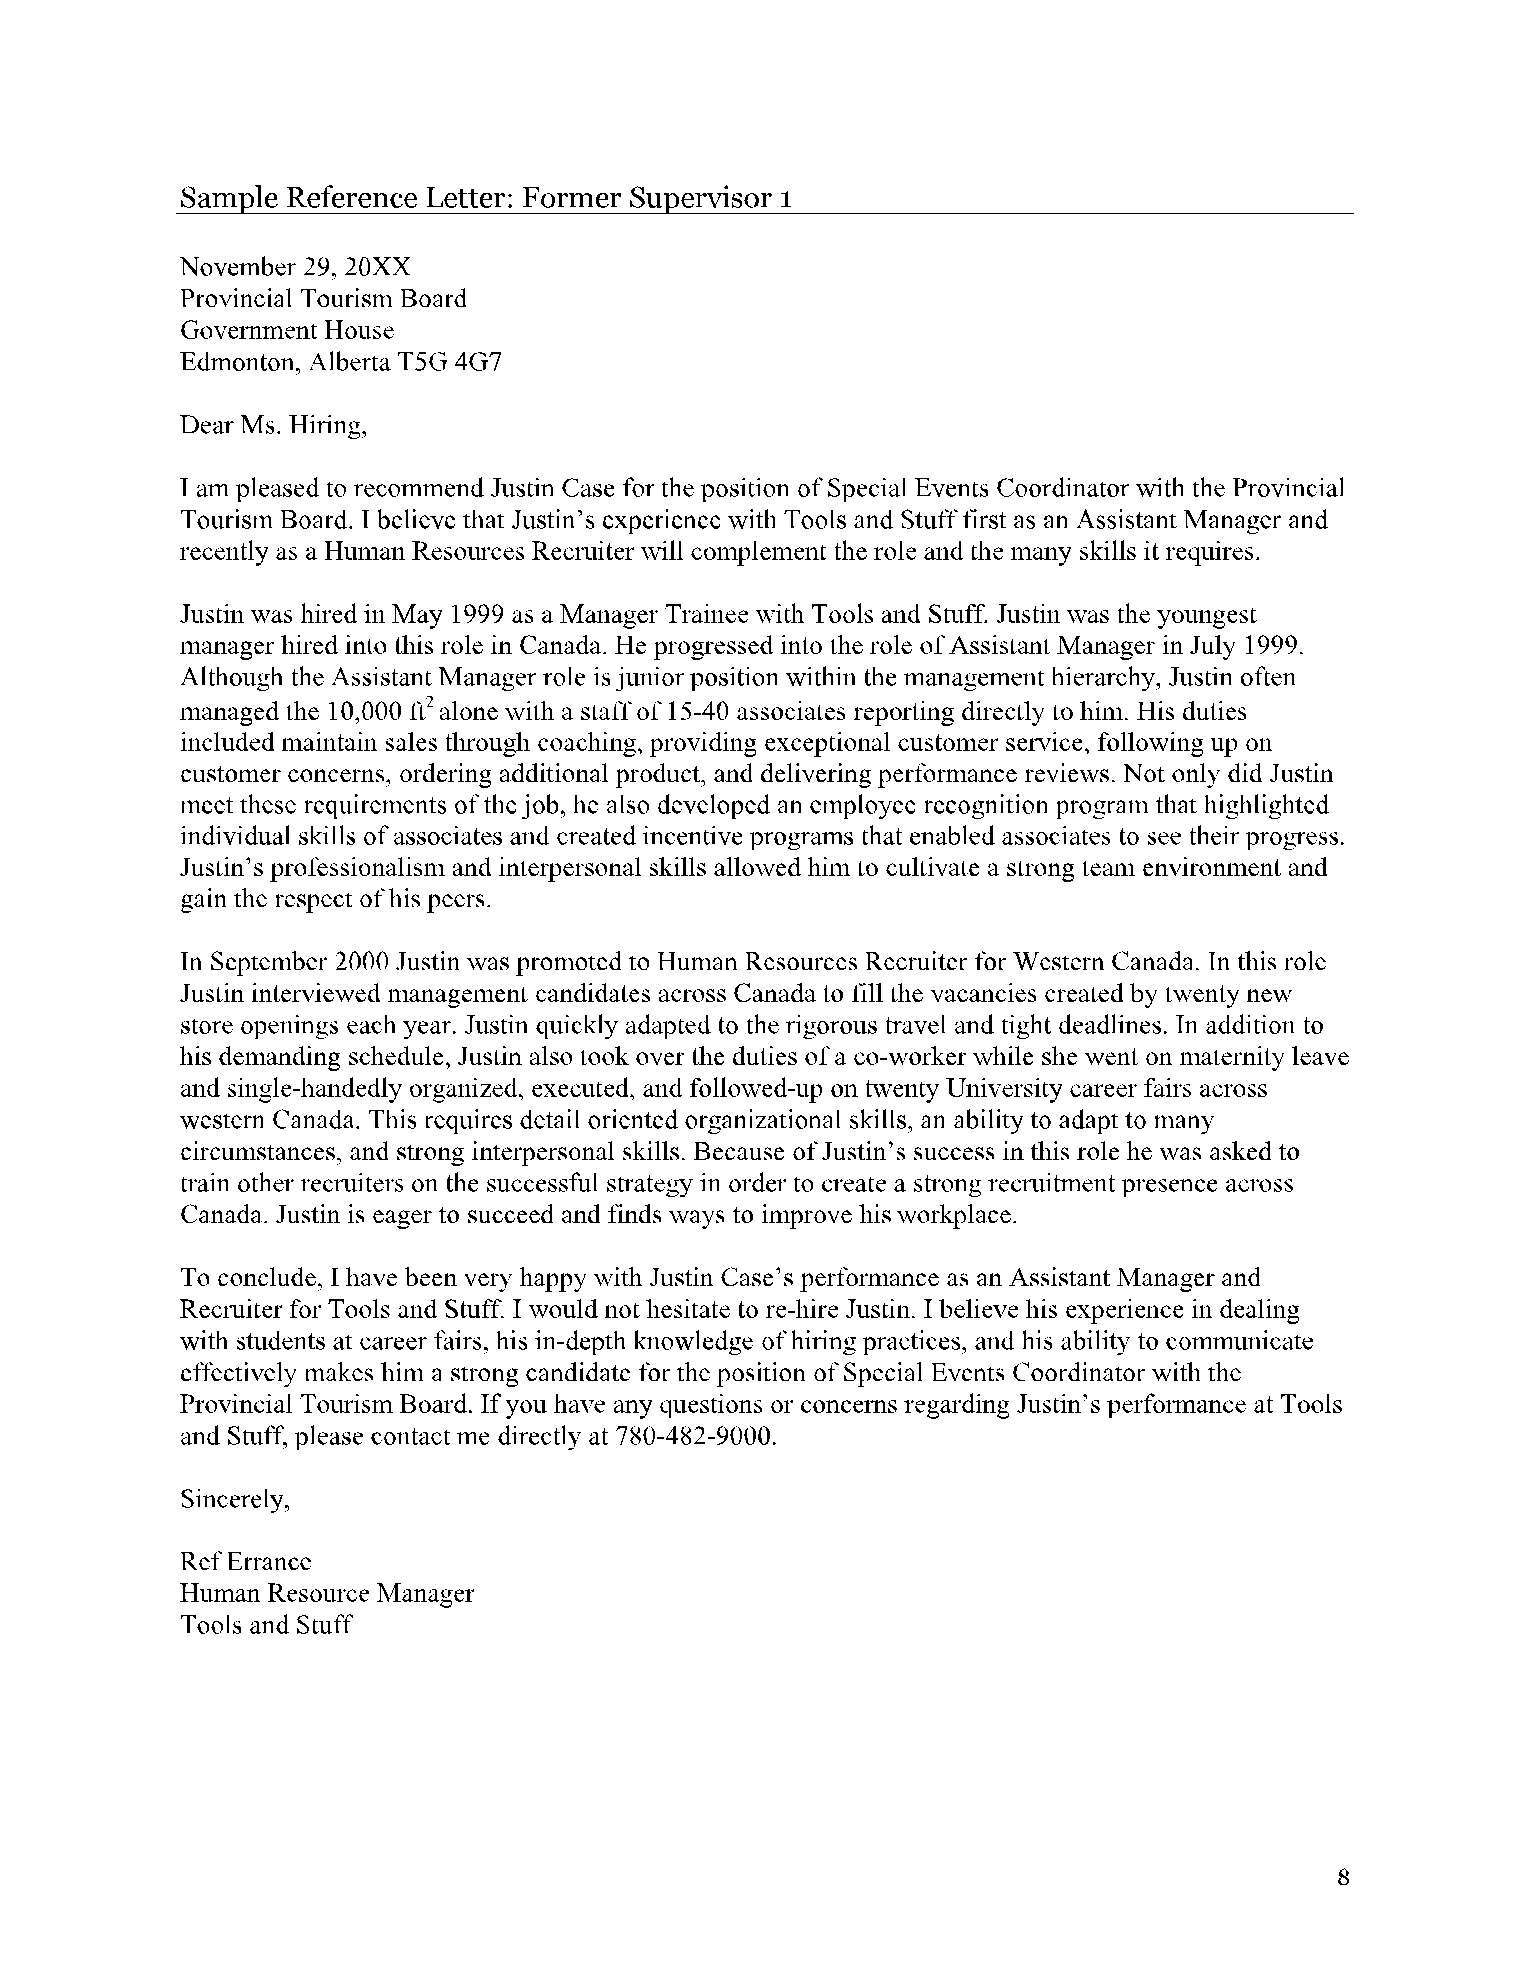 Letter of Recommendation for Immigration 8